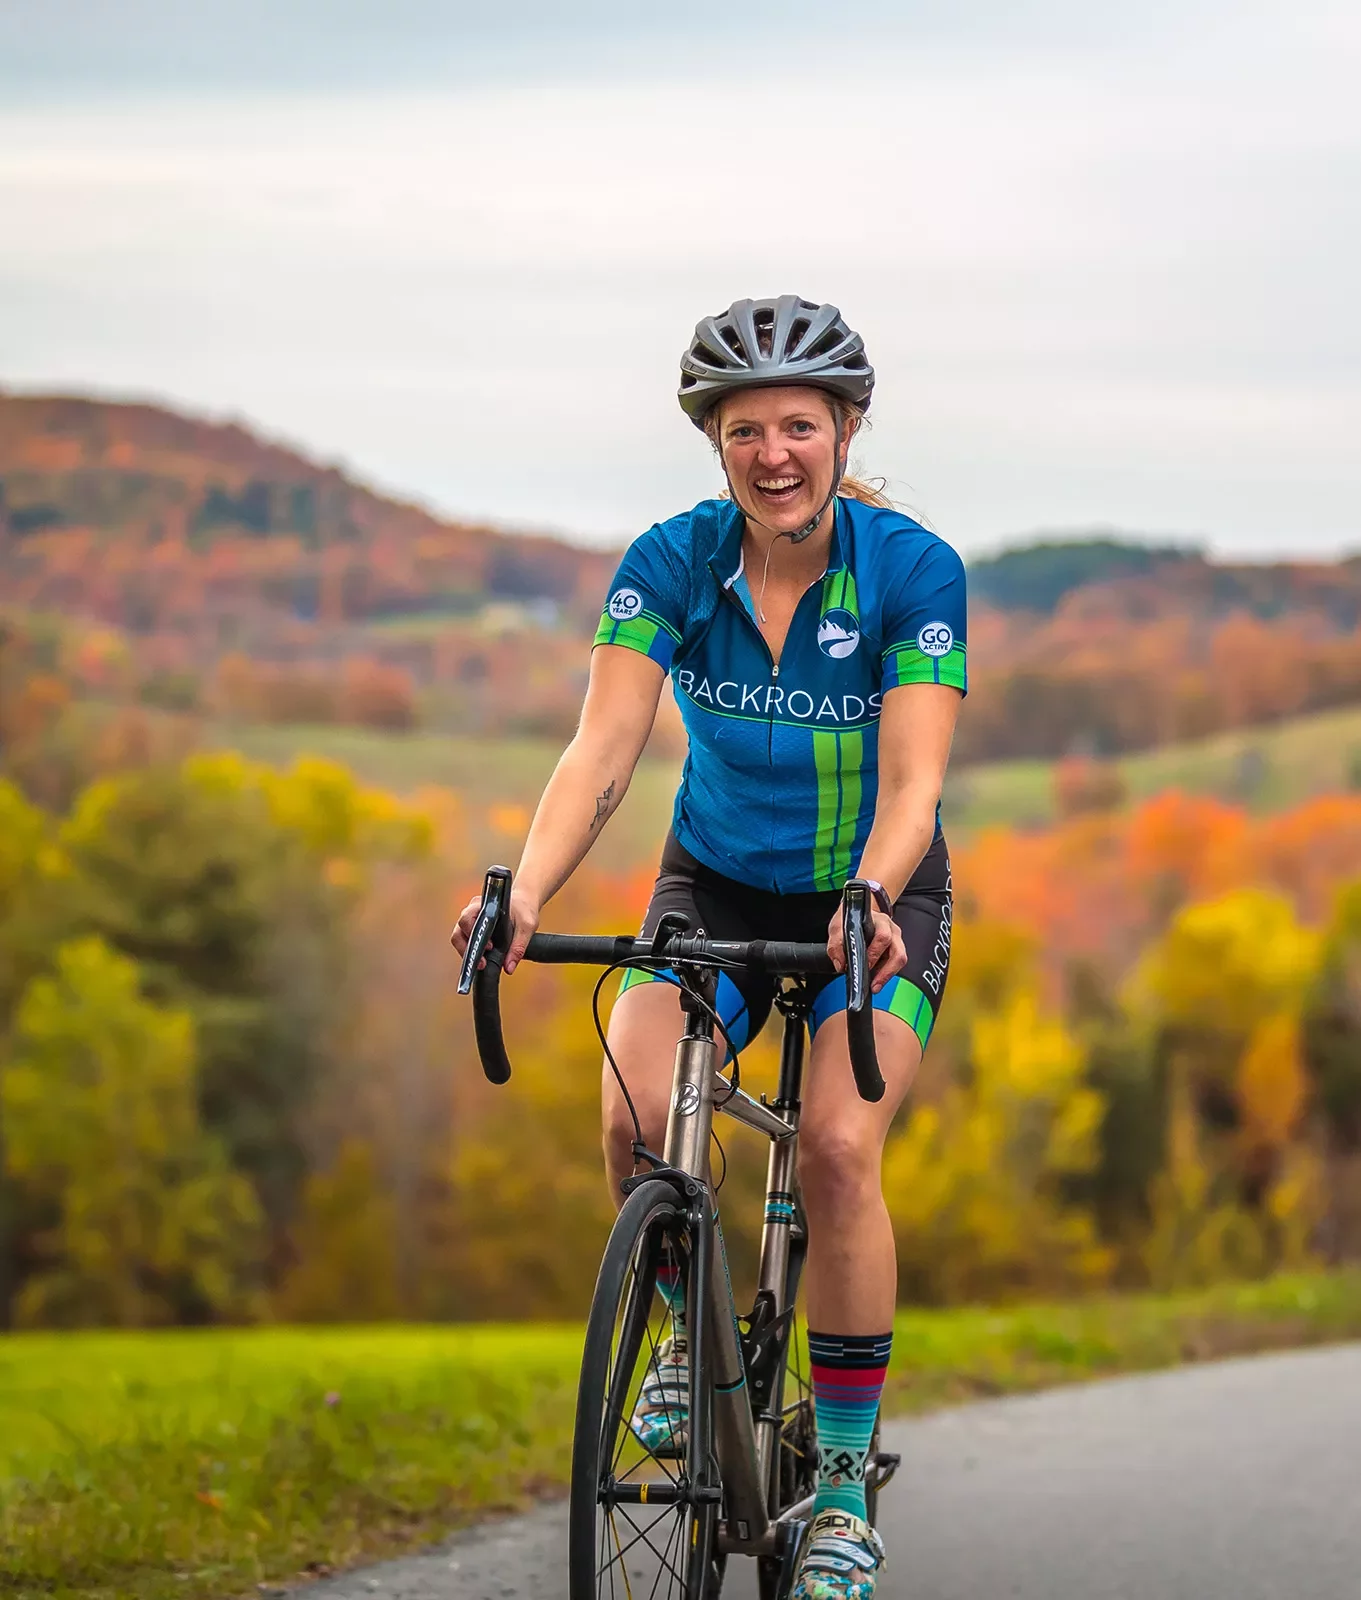 Guest cycling, smiling at camera, trees behind her.